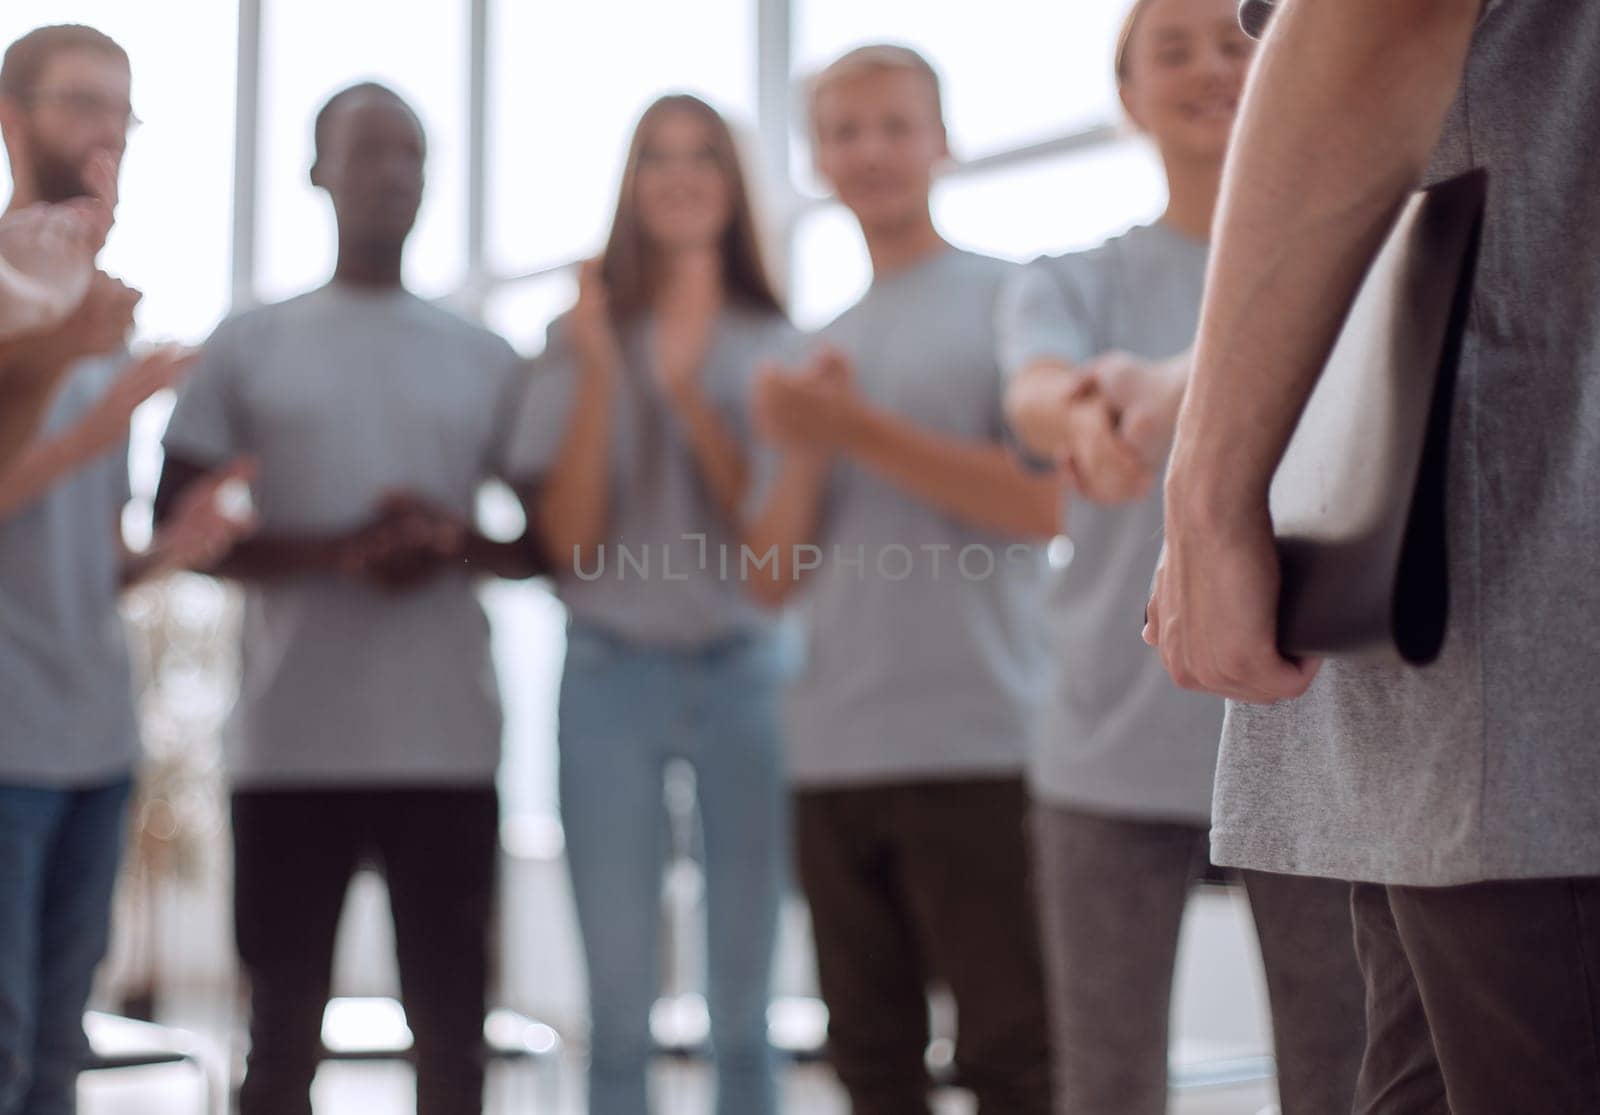 blurred image of a group of young people sitting in a circle. photo with copy space